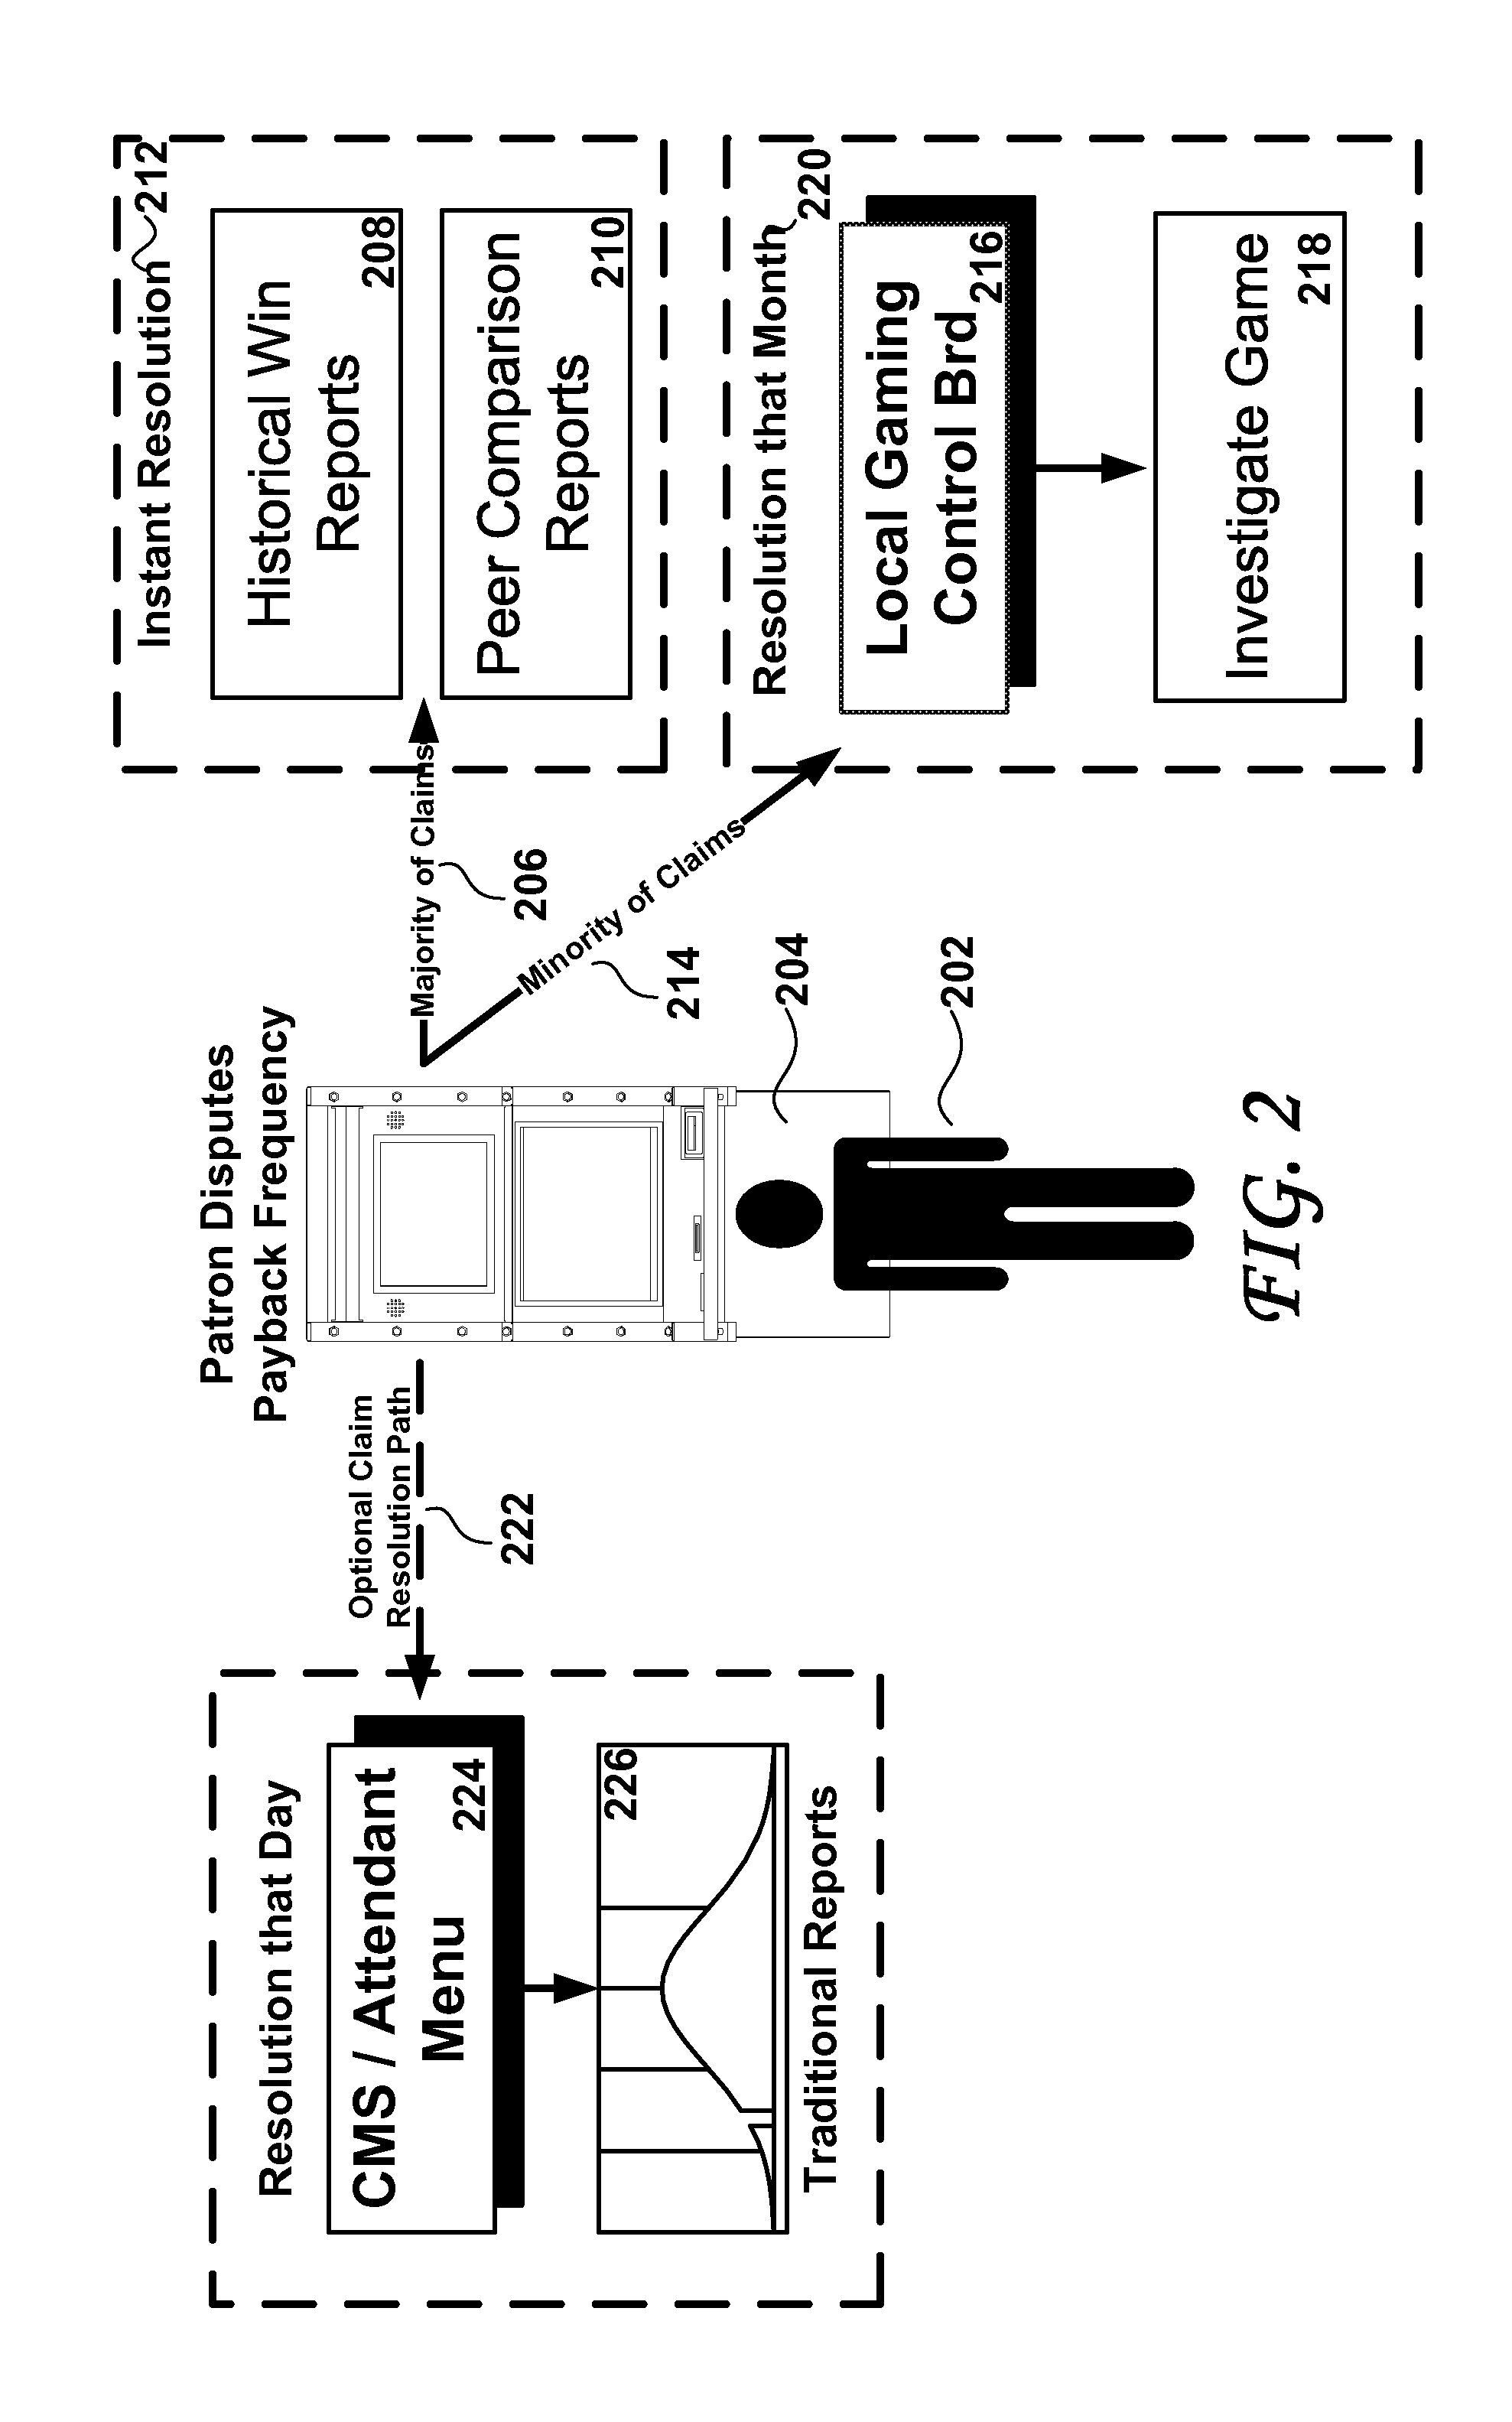 Methods and systems for intelligent dispute resolution within next generation casino games